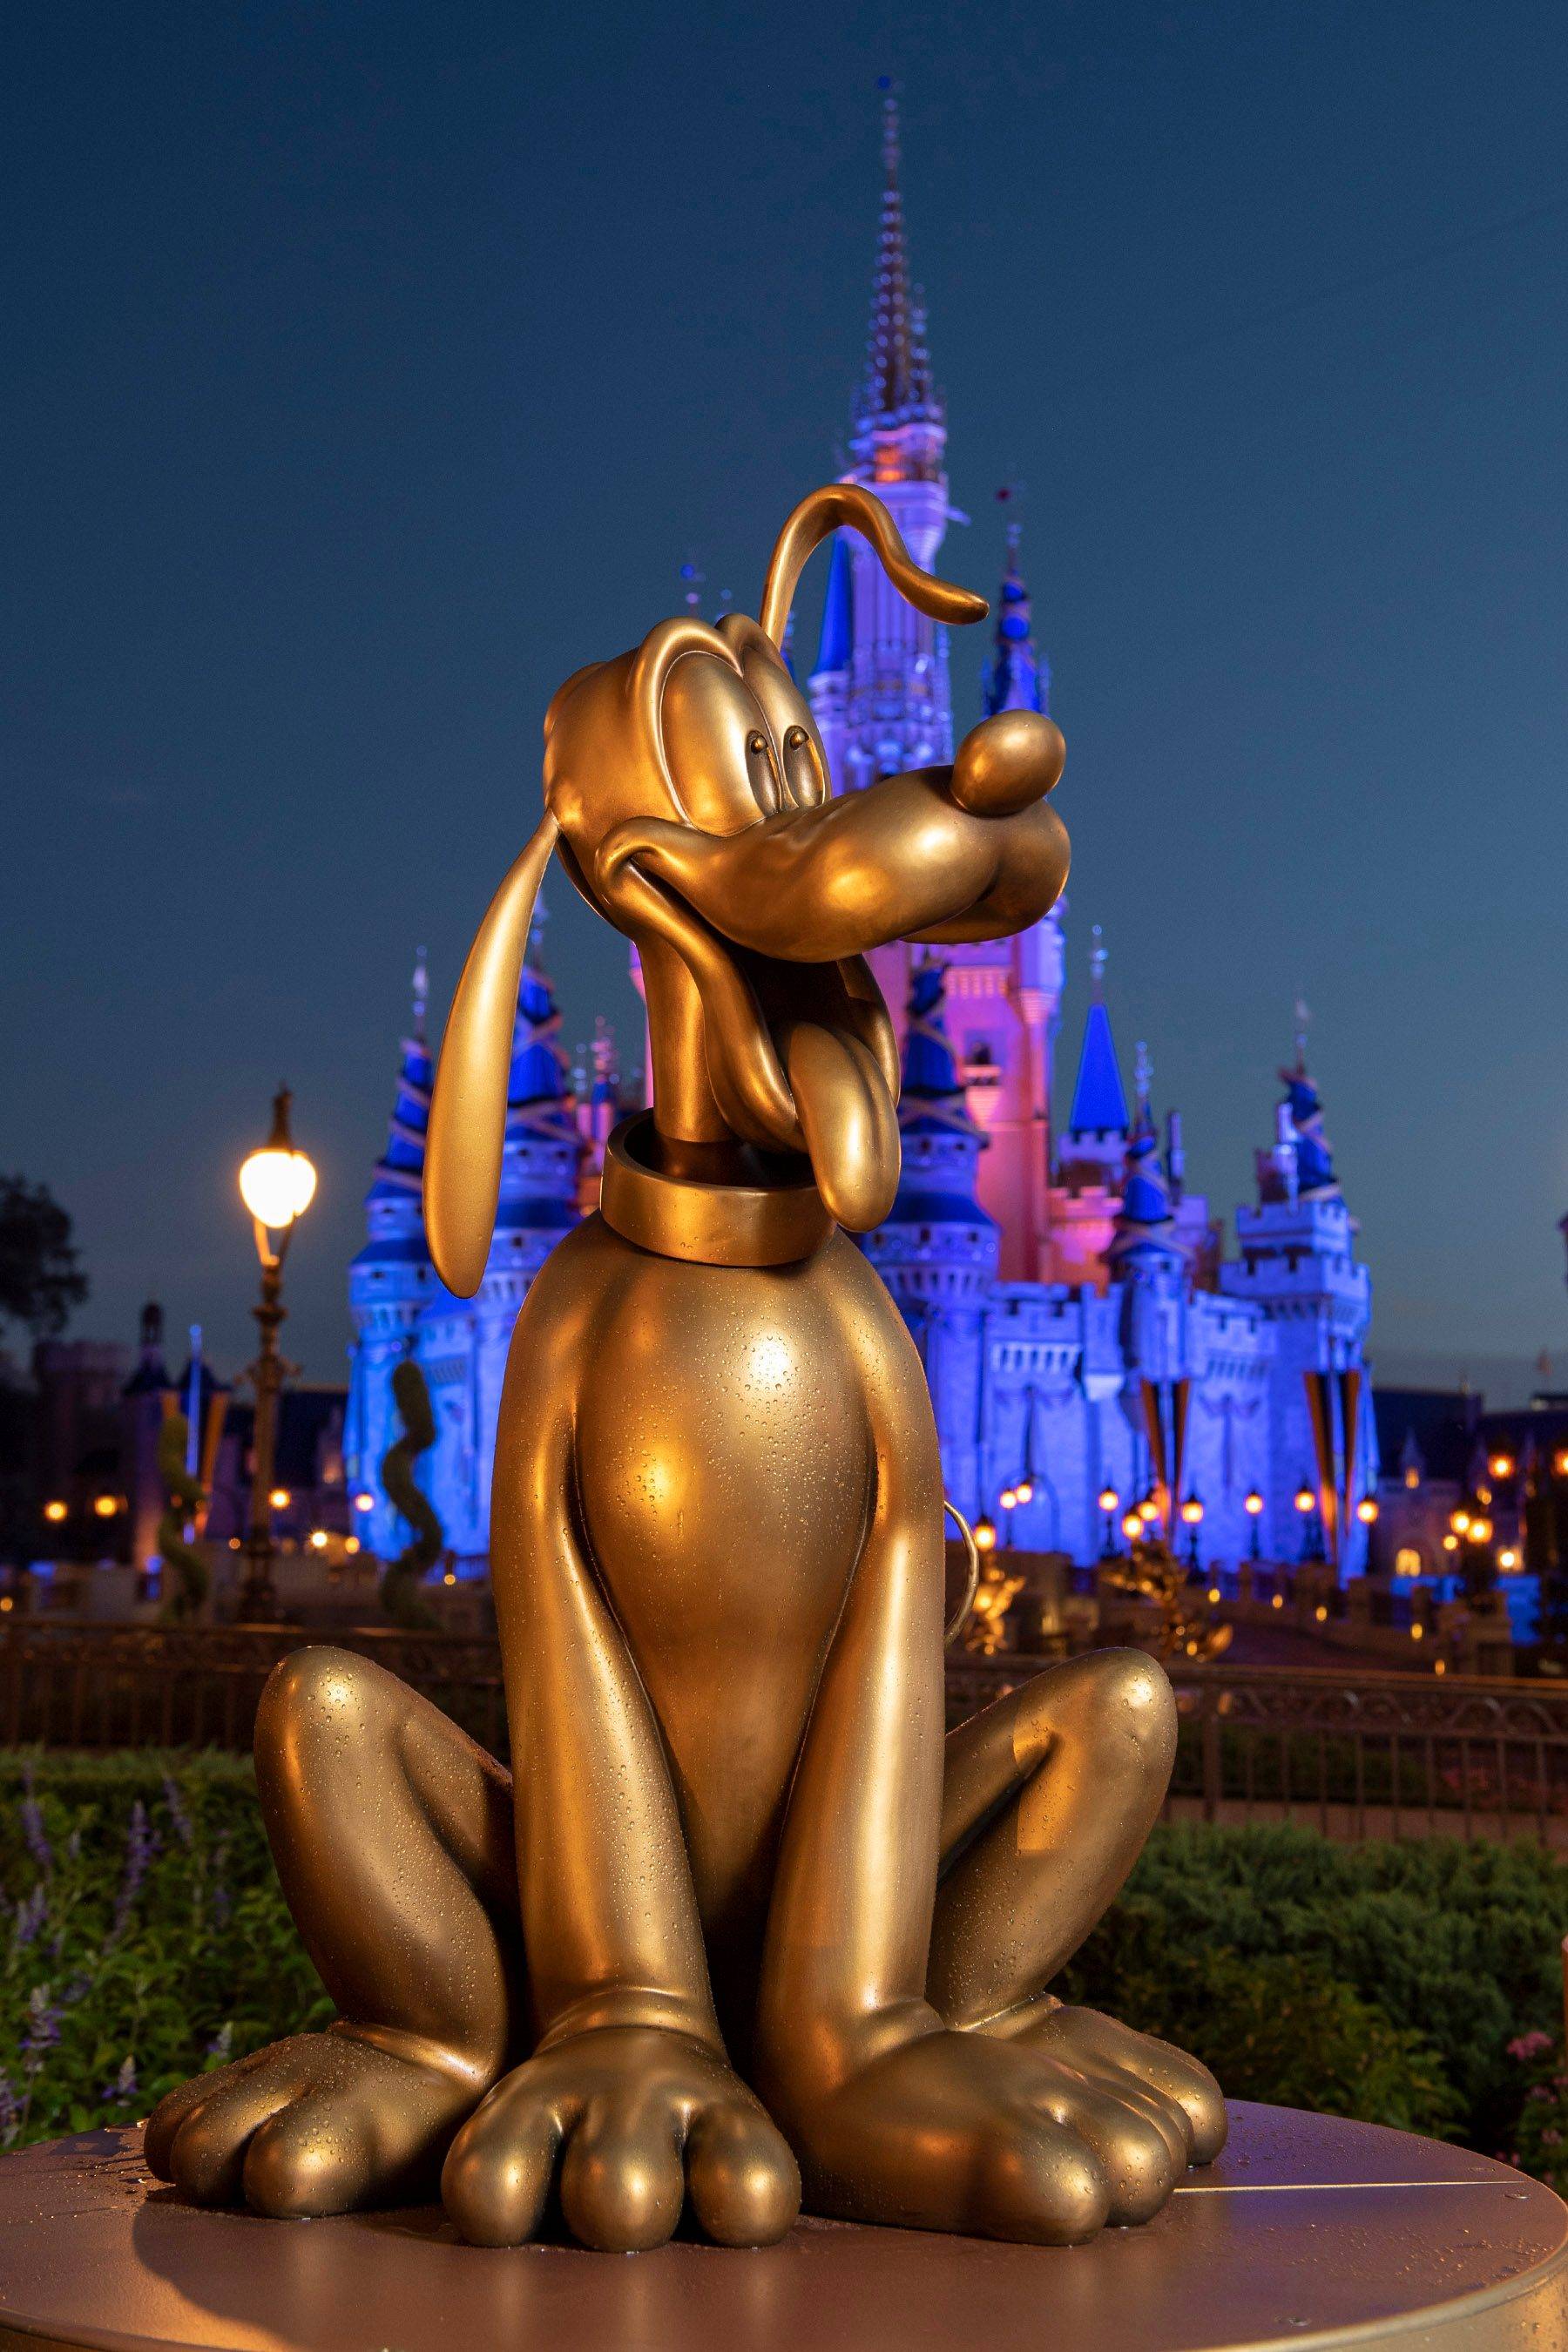 Disney Fab 50 Character collection statue - Pluto